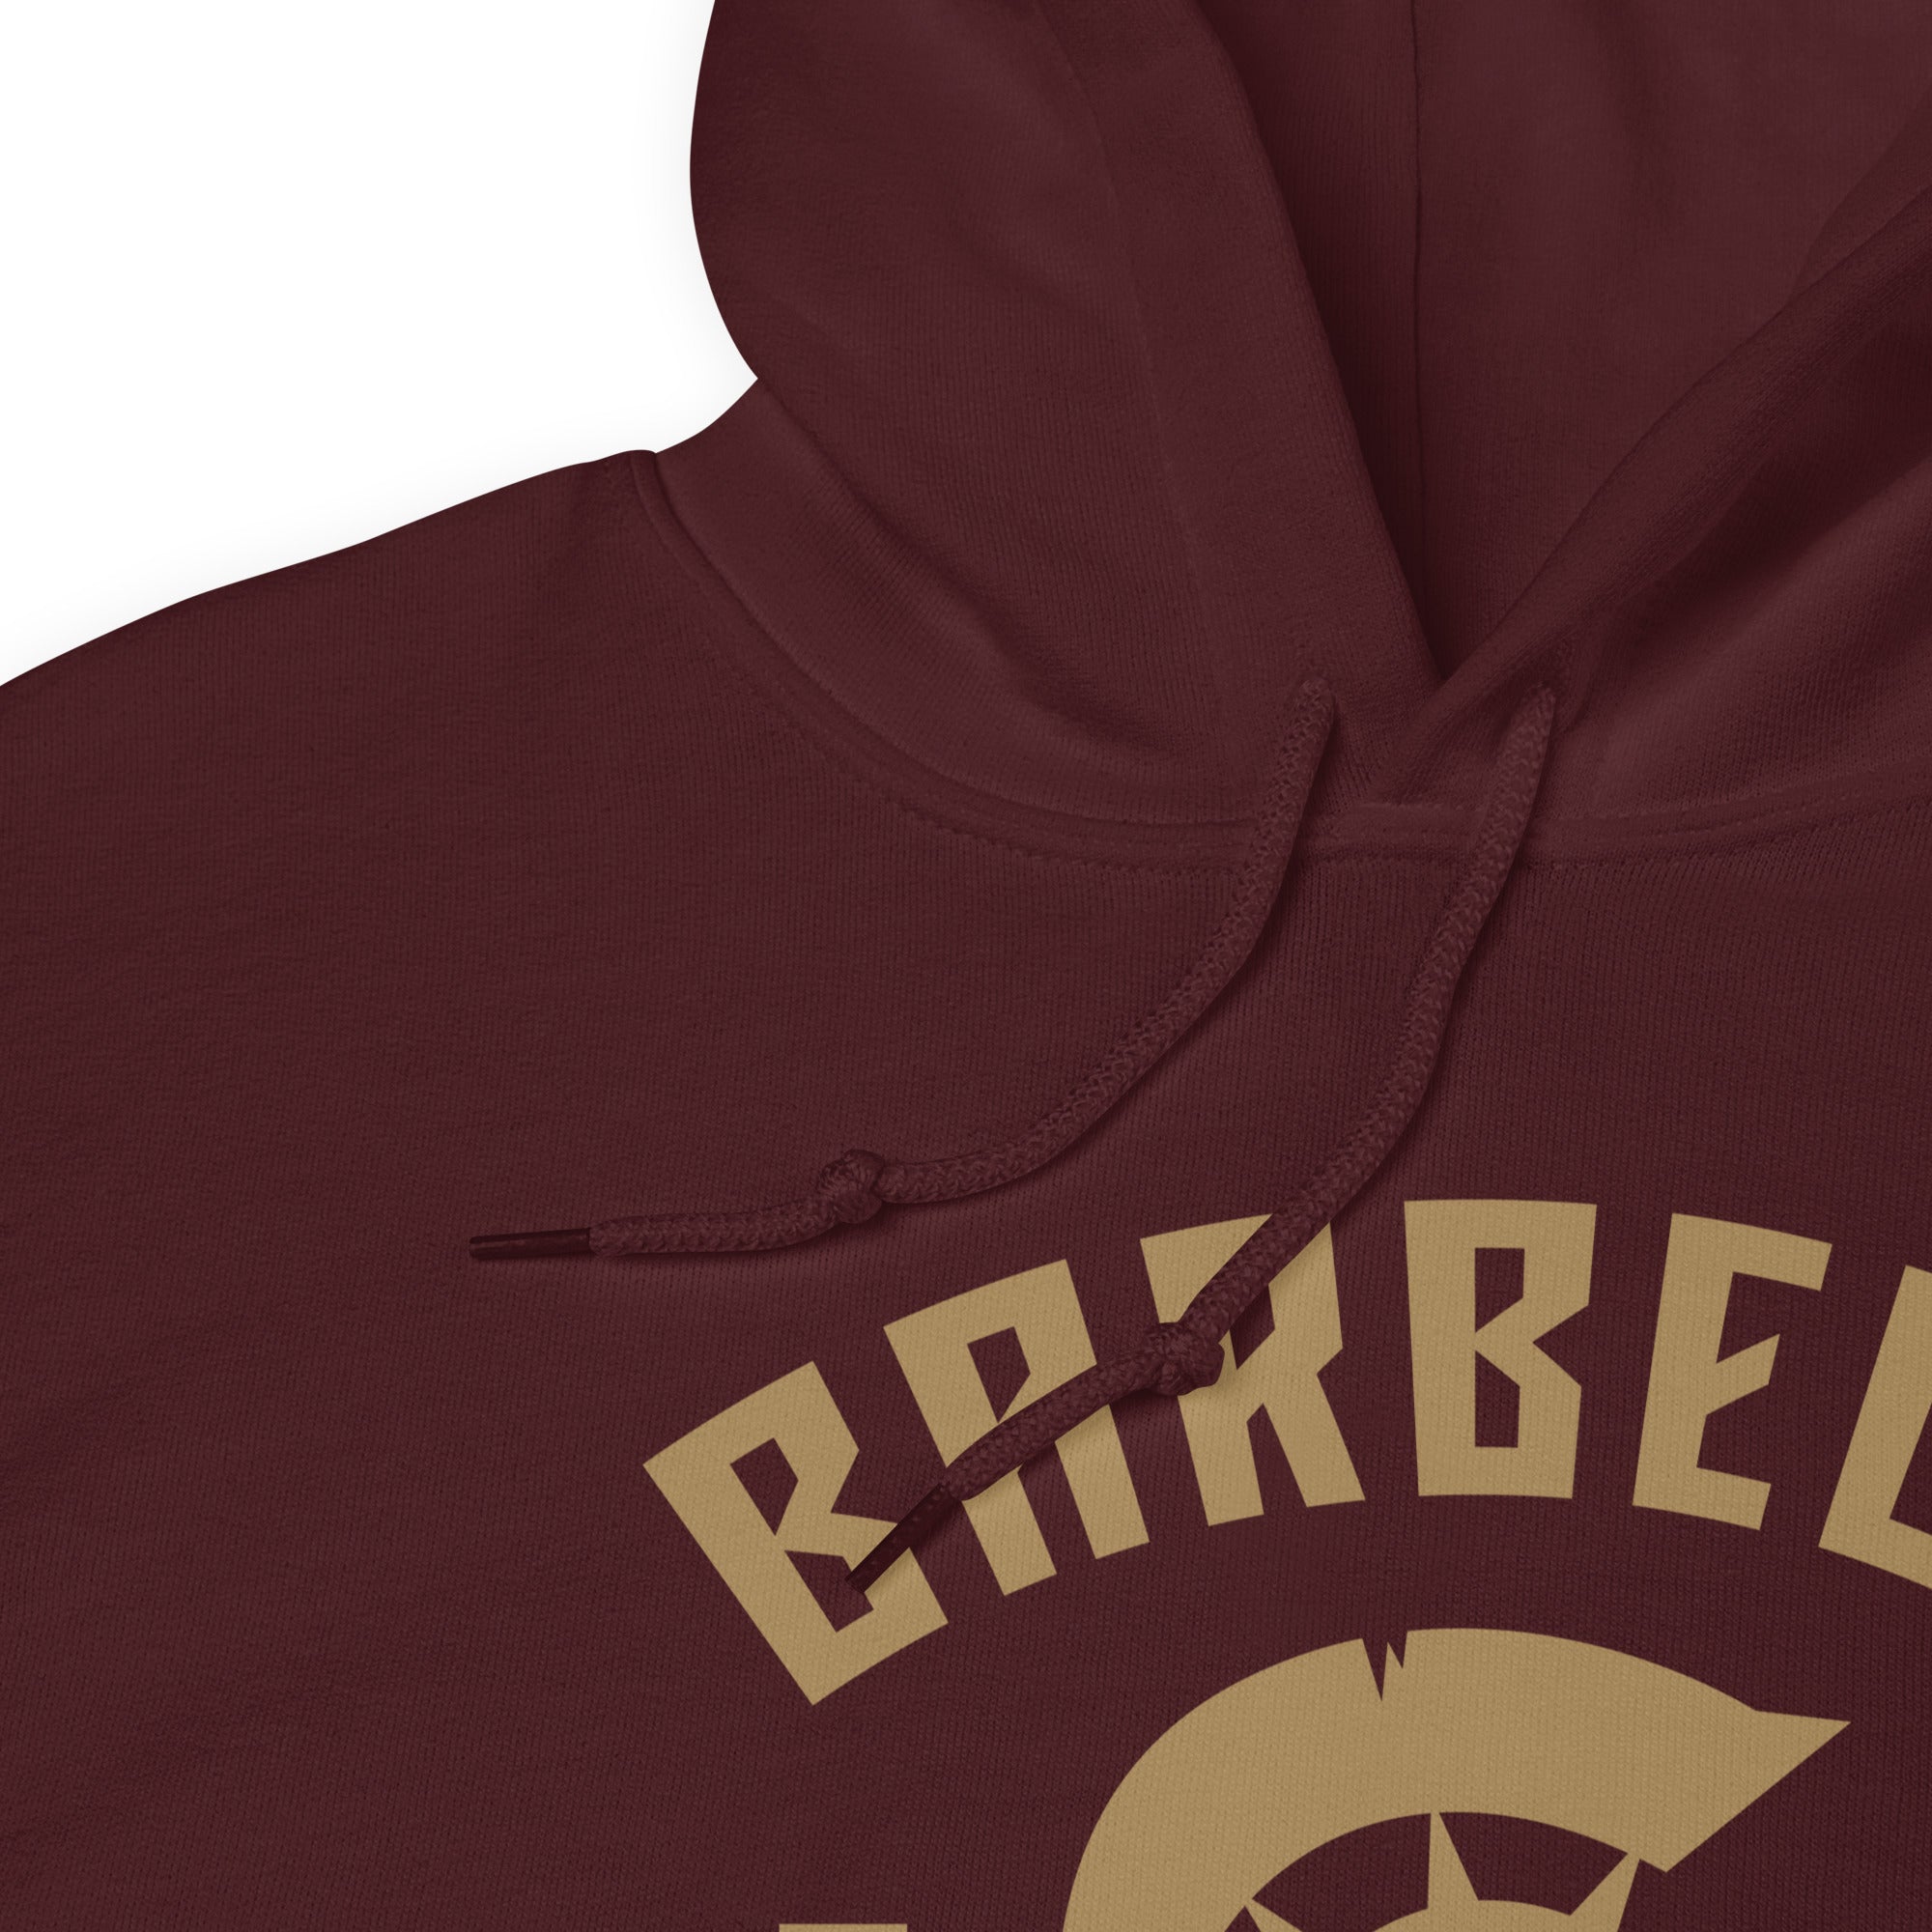 Barbell Warrior Gym Workout Hoodie for Women